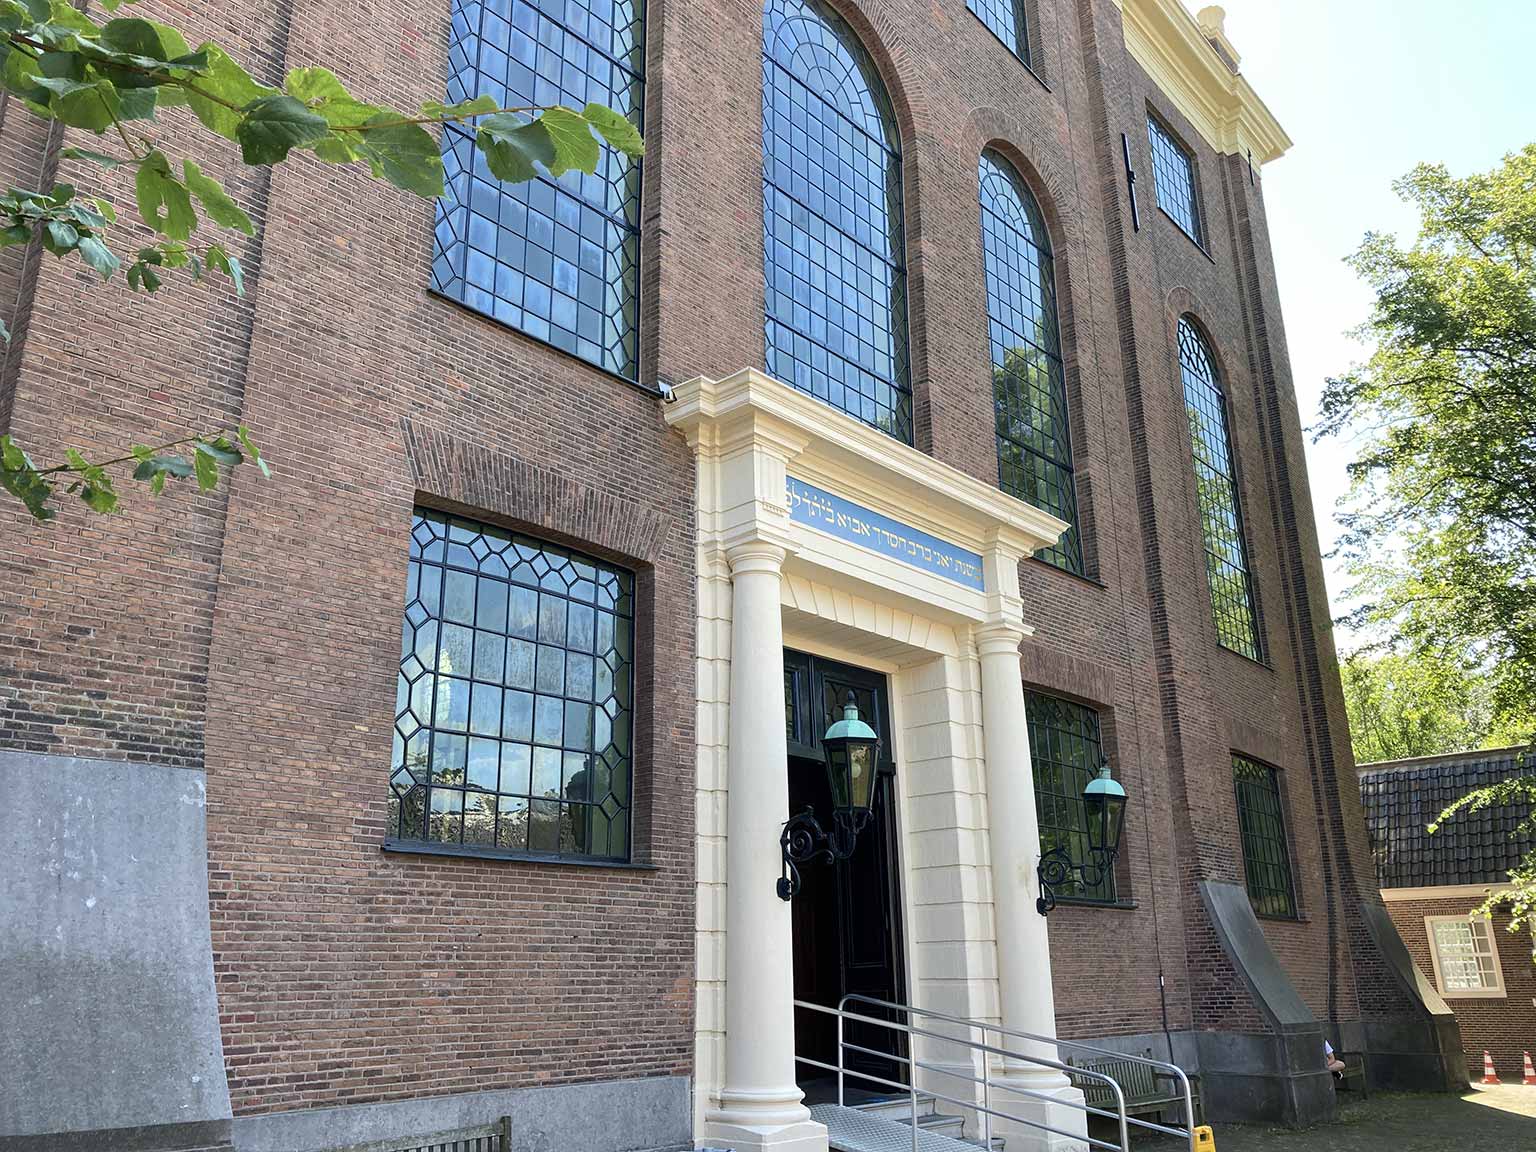 Entrance of the Portuguese Synagogue main building, Amsterdam